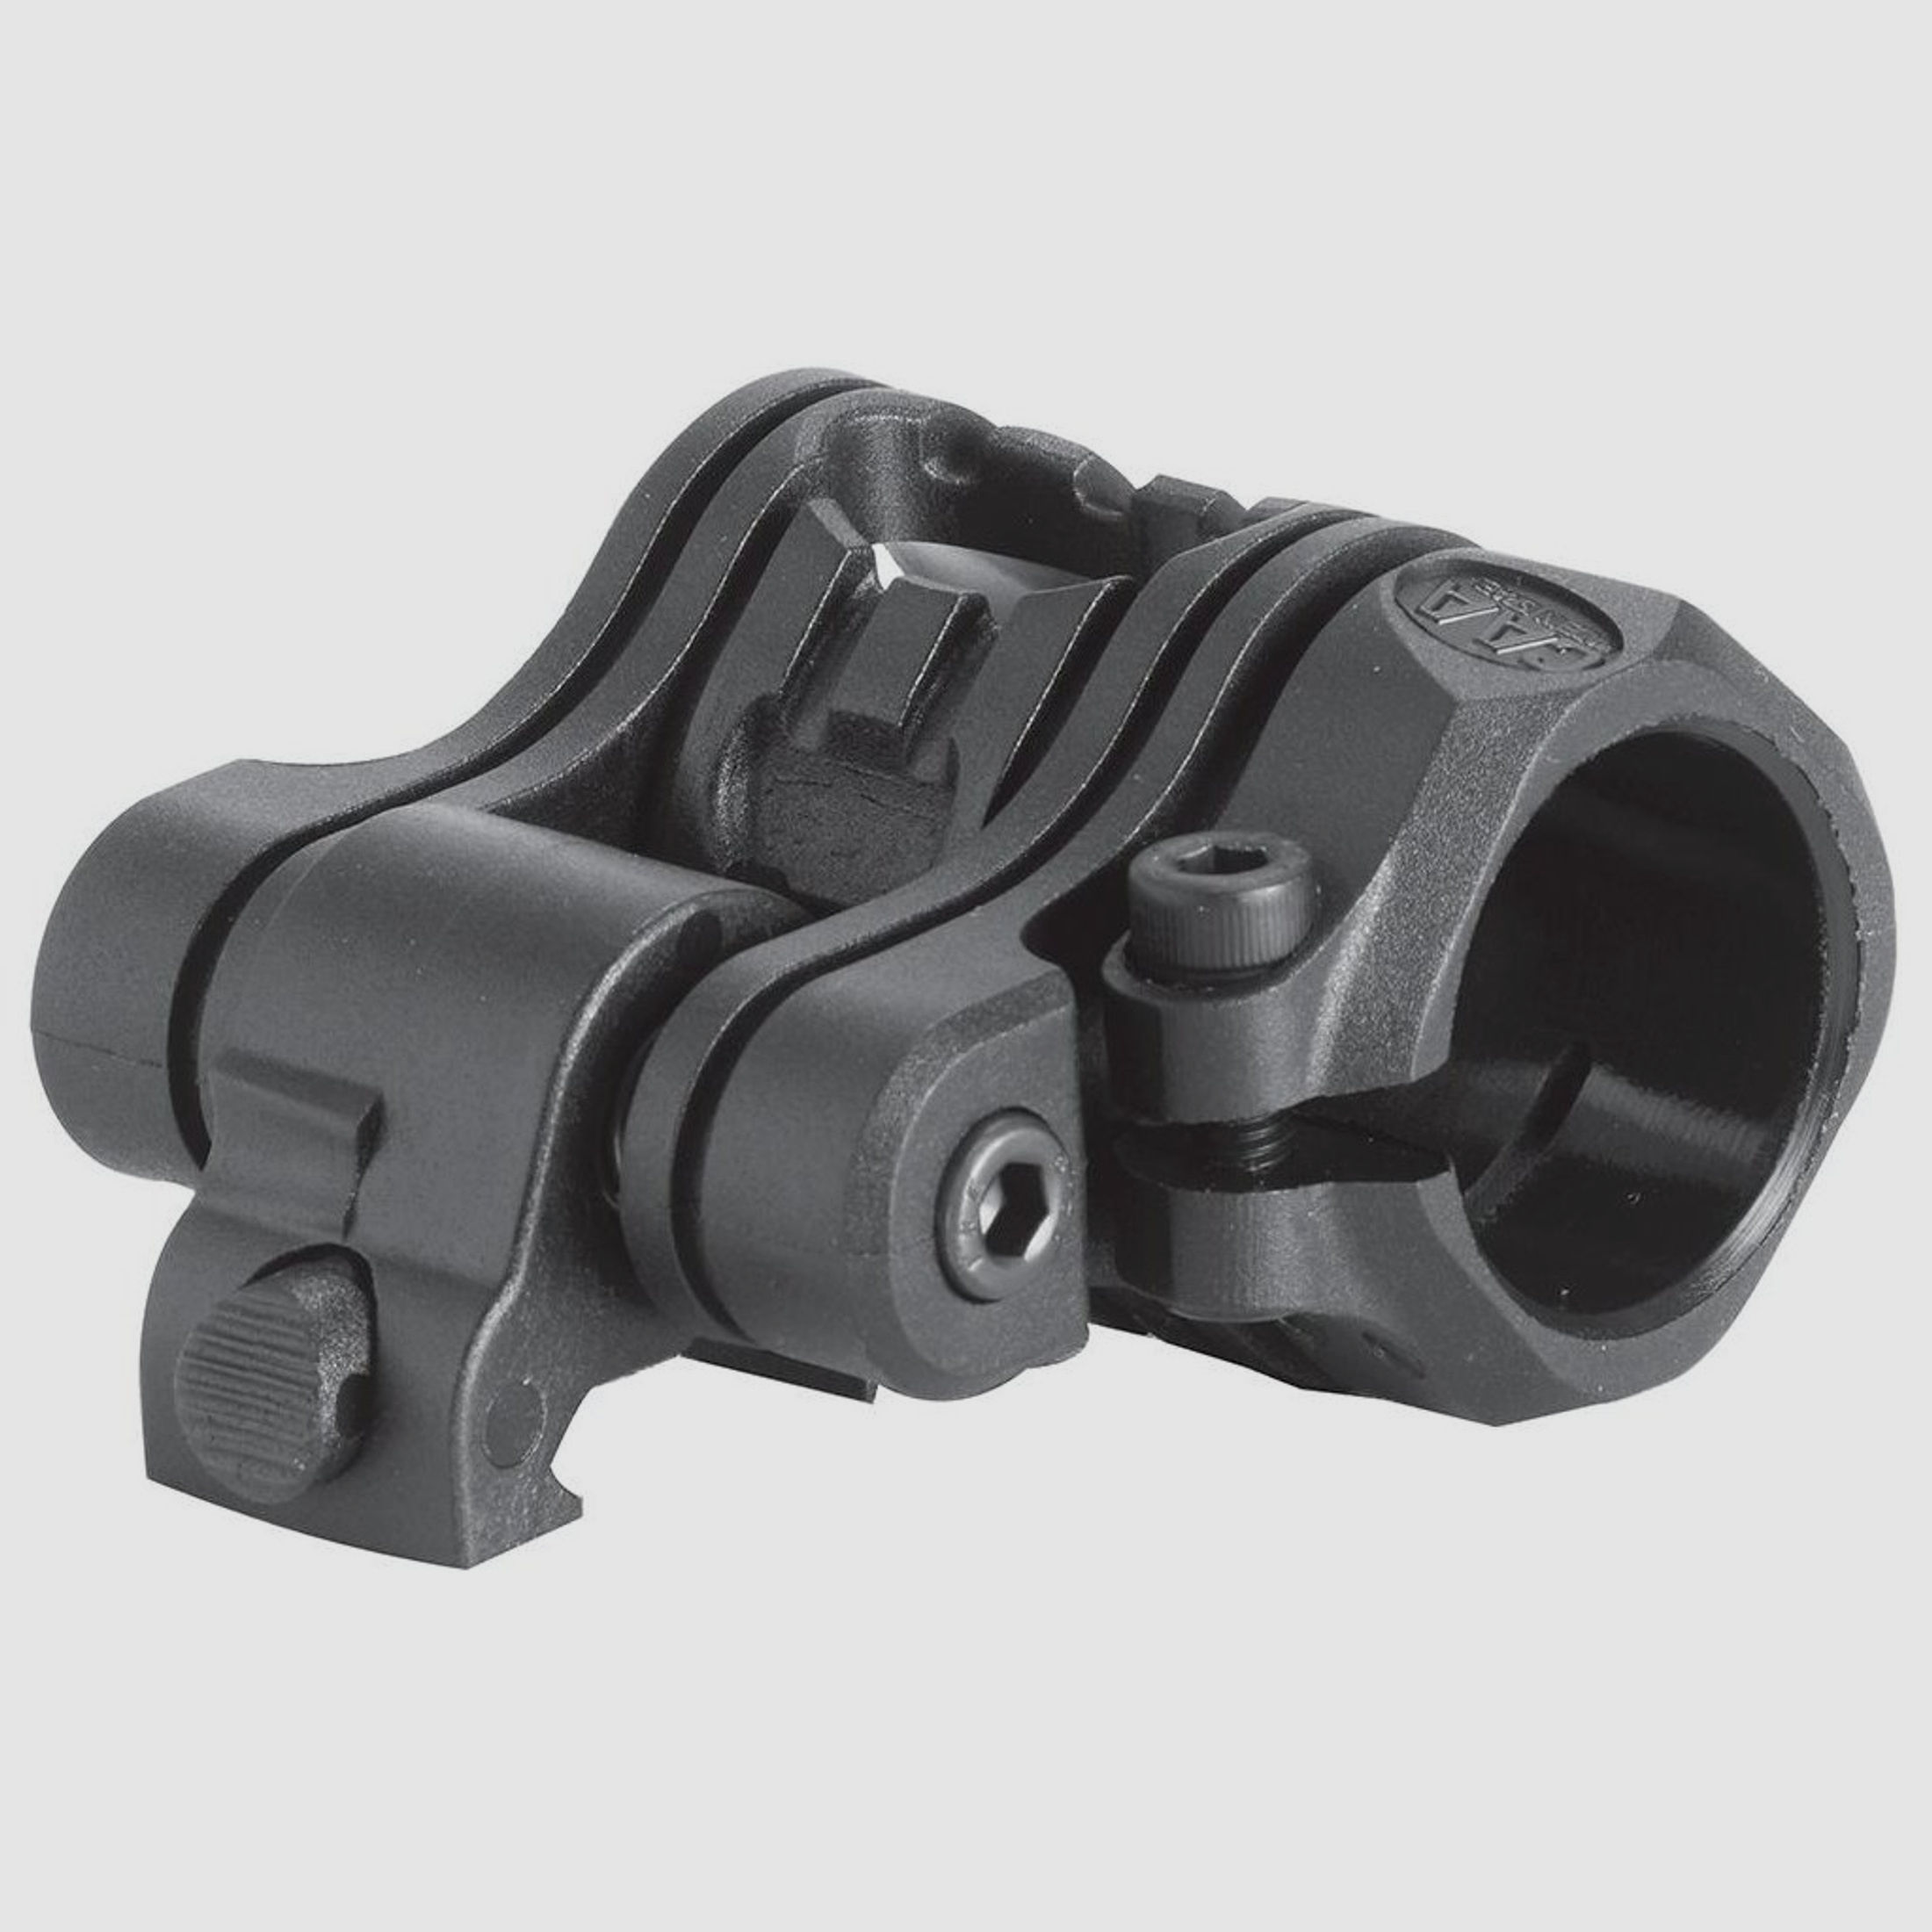 CAA Tactical 1" Flashlight Mount Quick Release